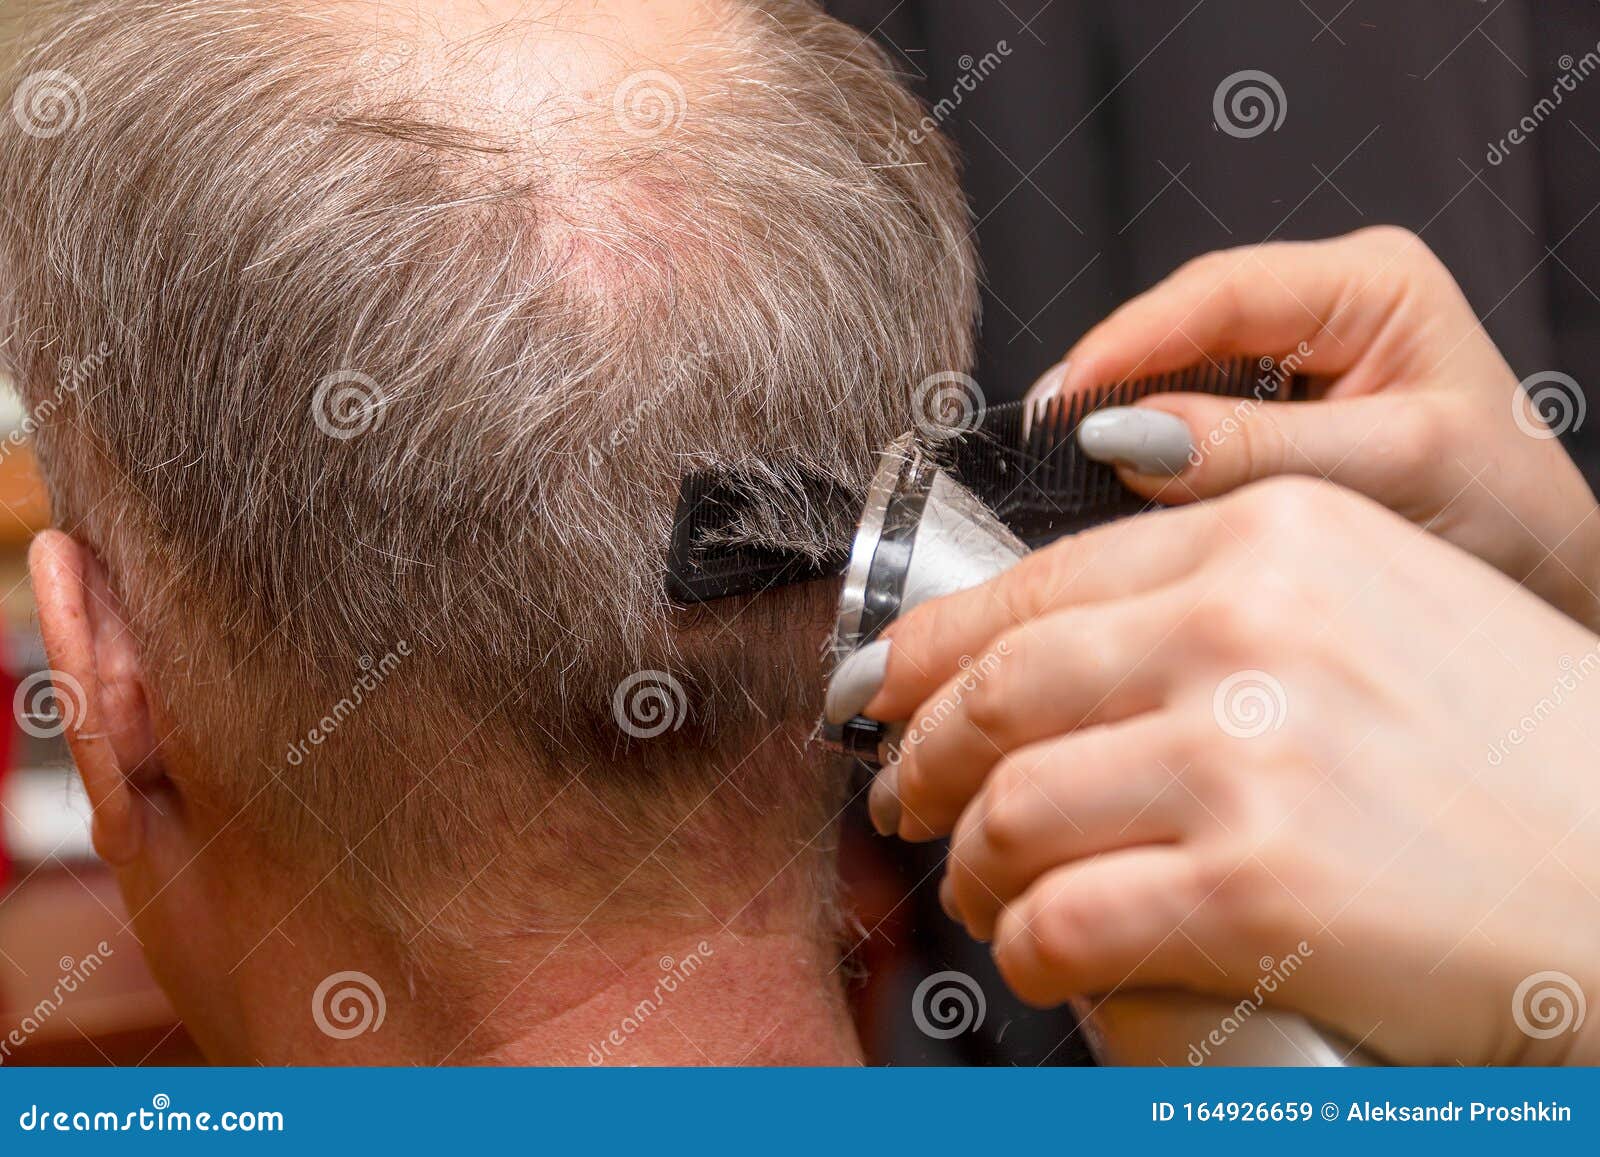 how to cut a man's hair using clippers